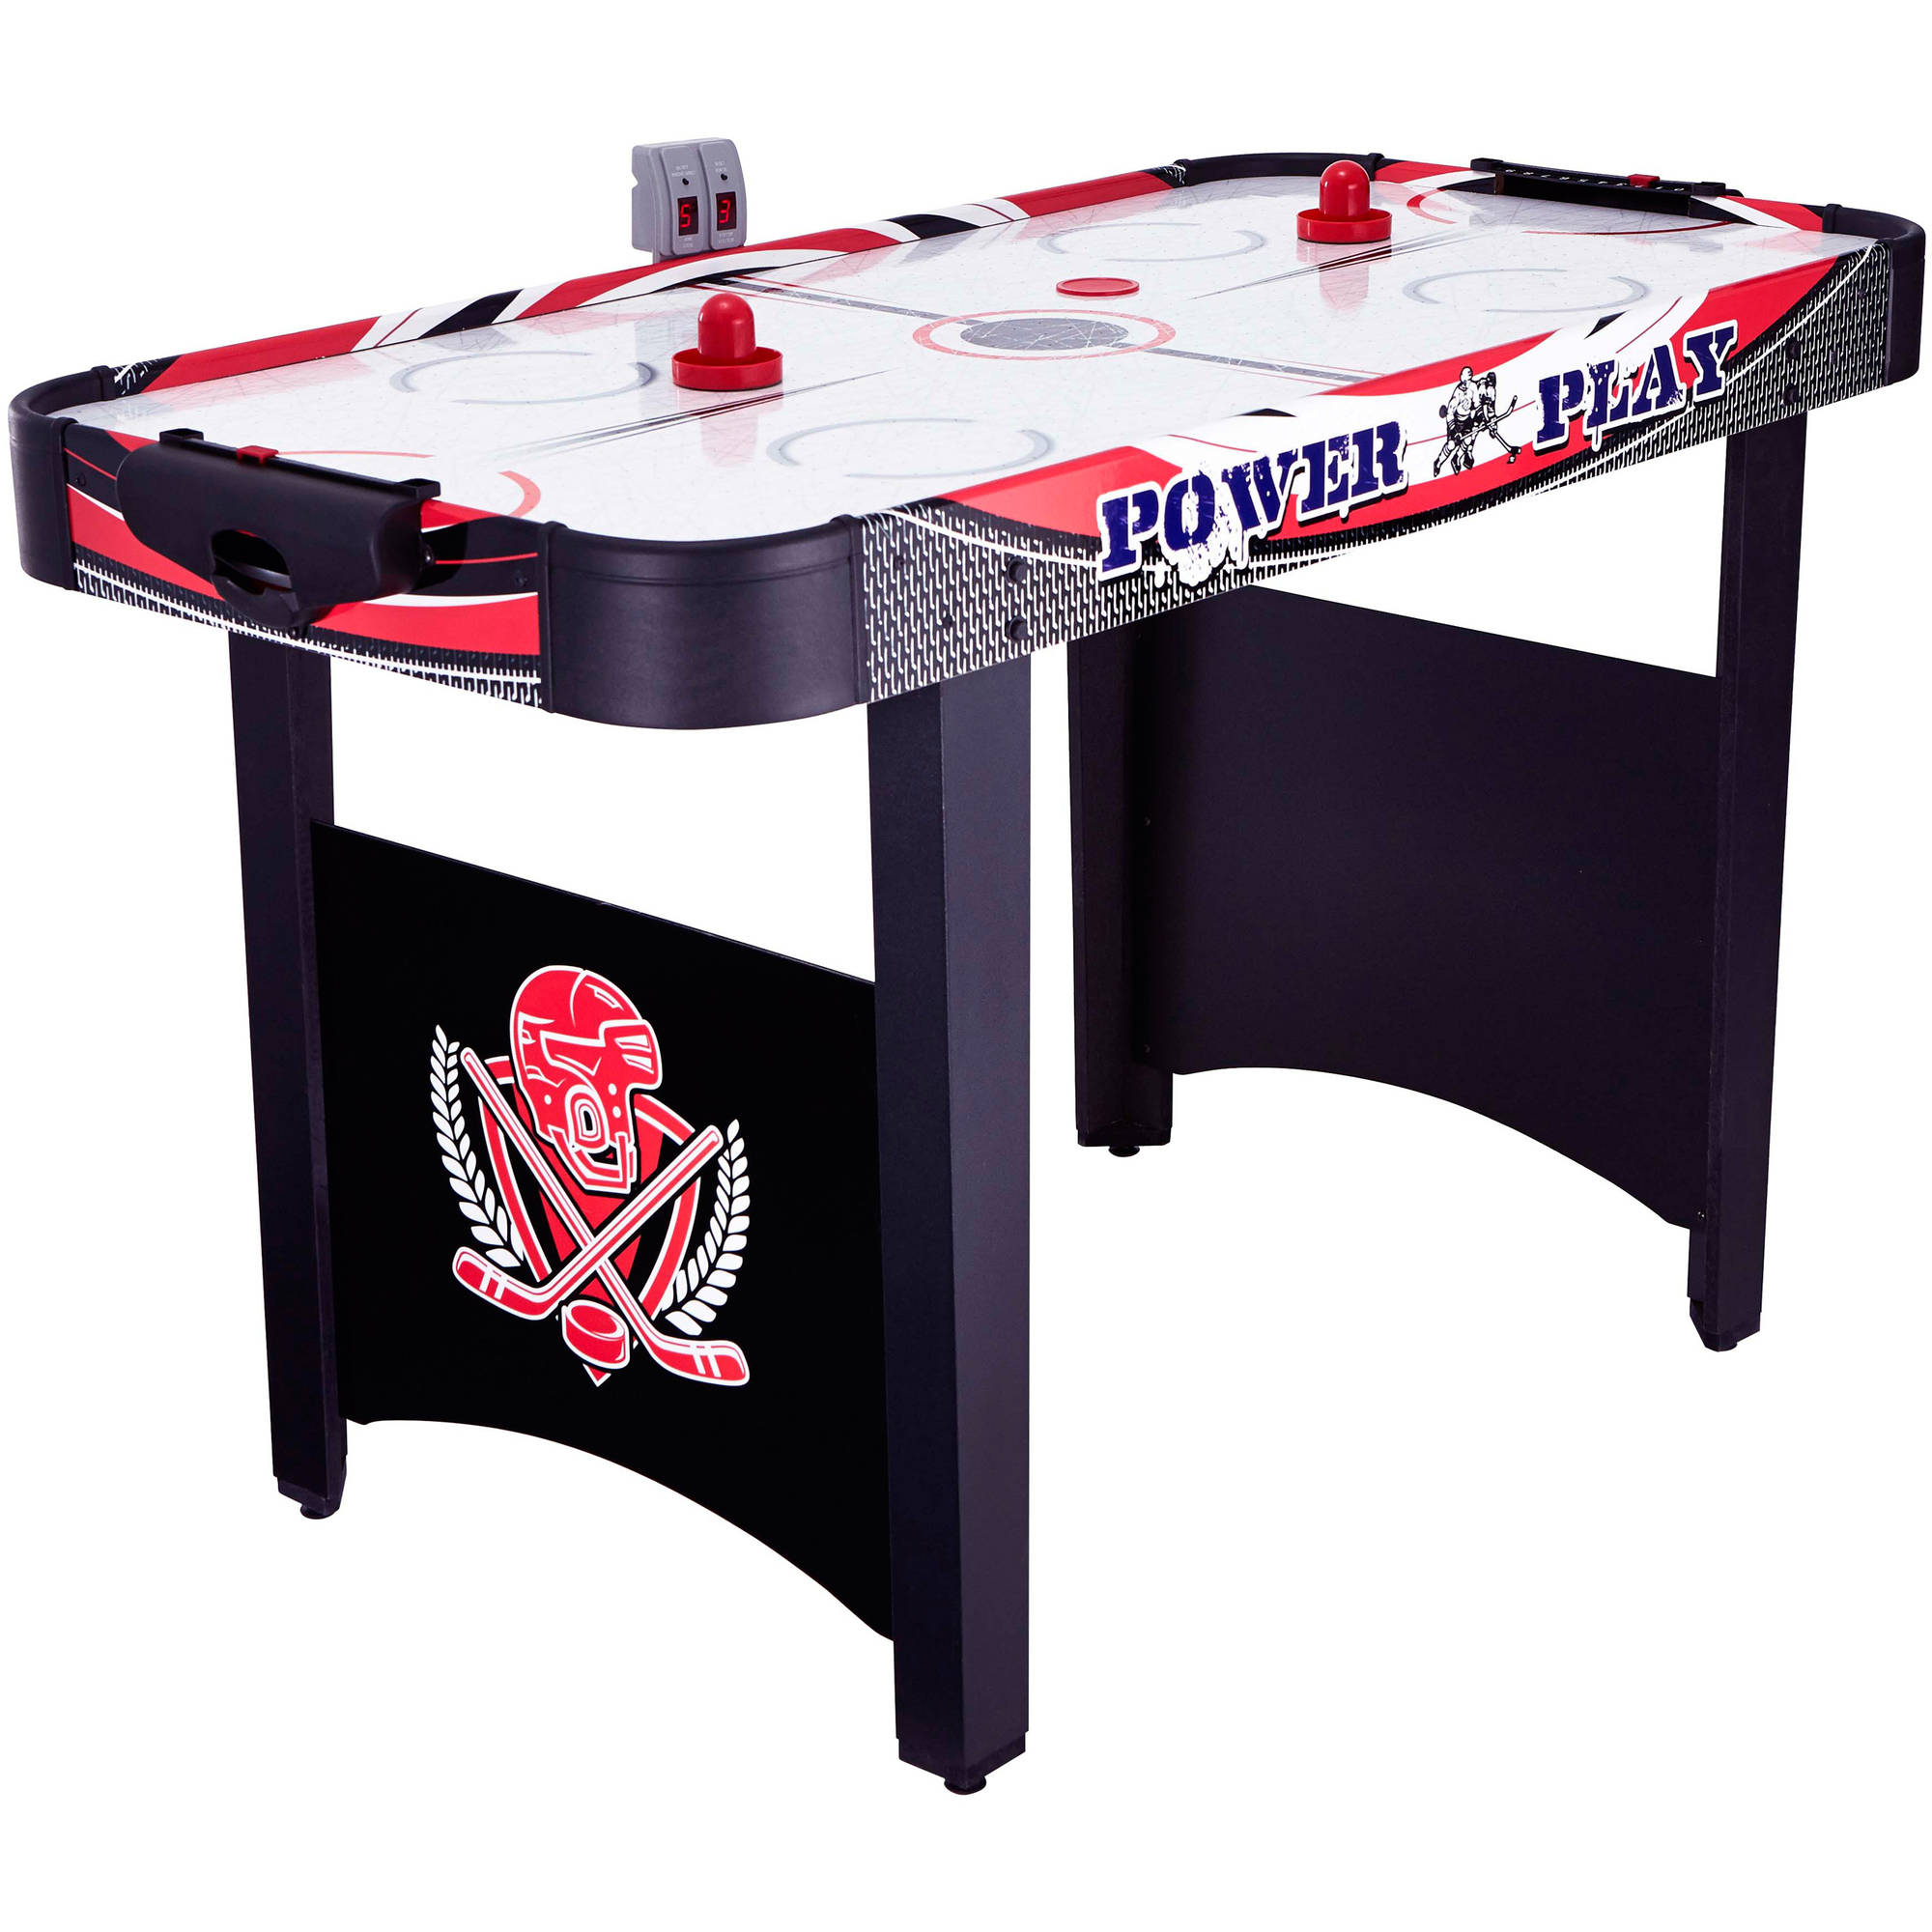 48" Air Powered Hockey Table - image 2 of 6